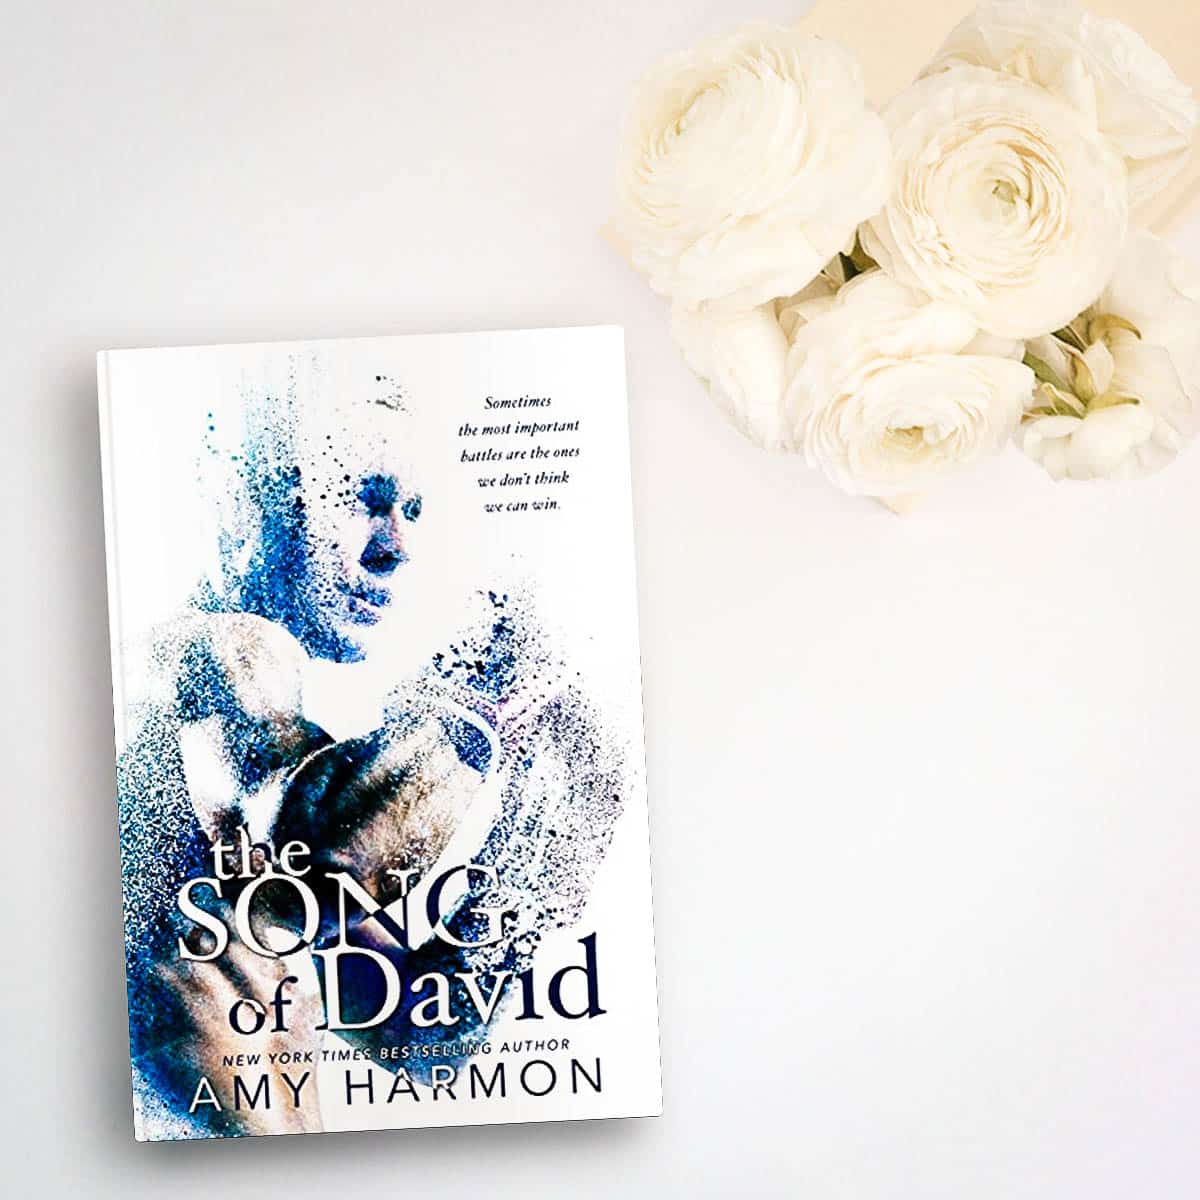 The Song of David by Amy Harmon – An Excerpt + Music!